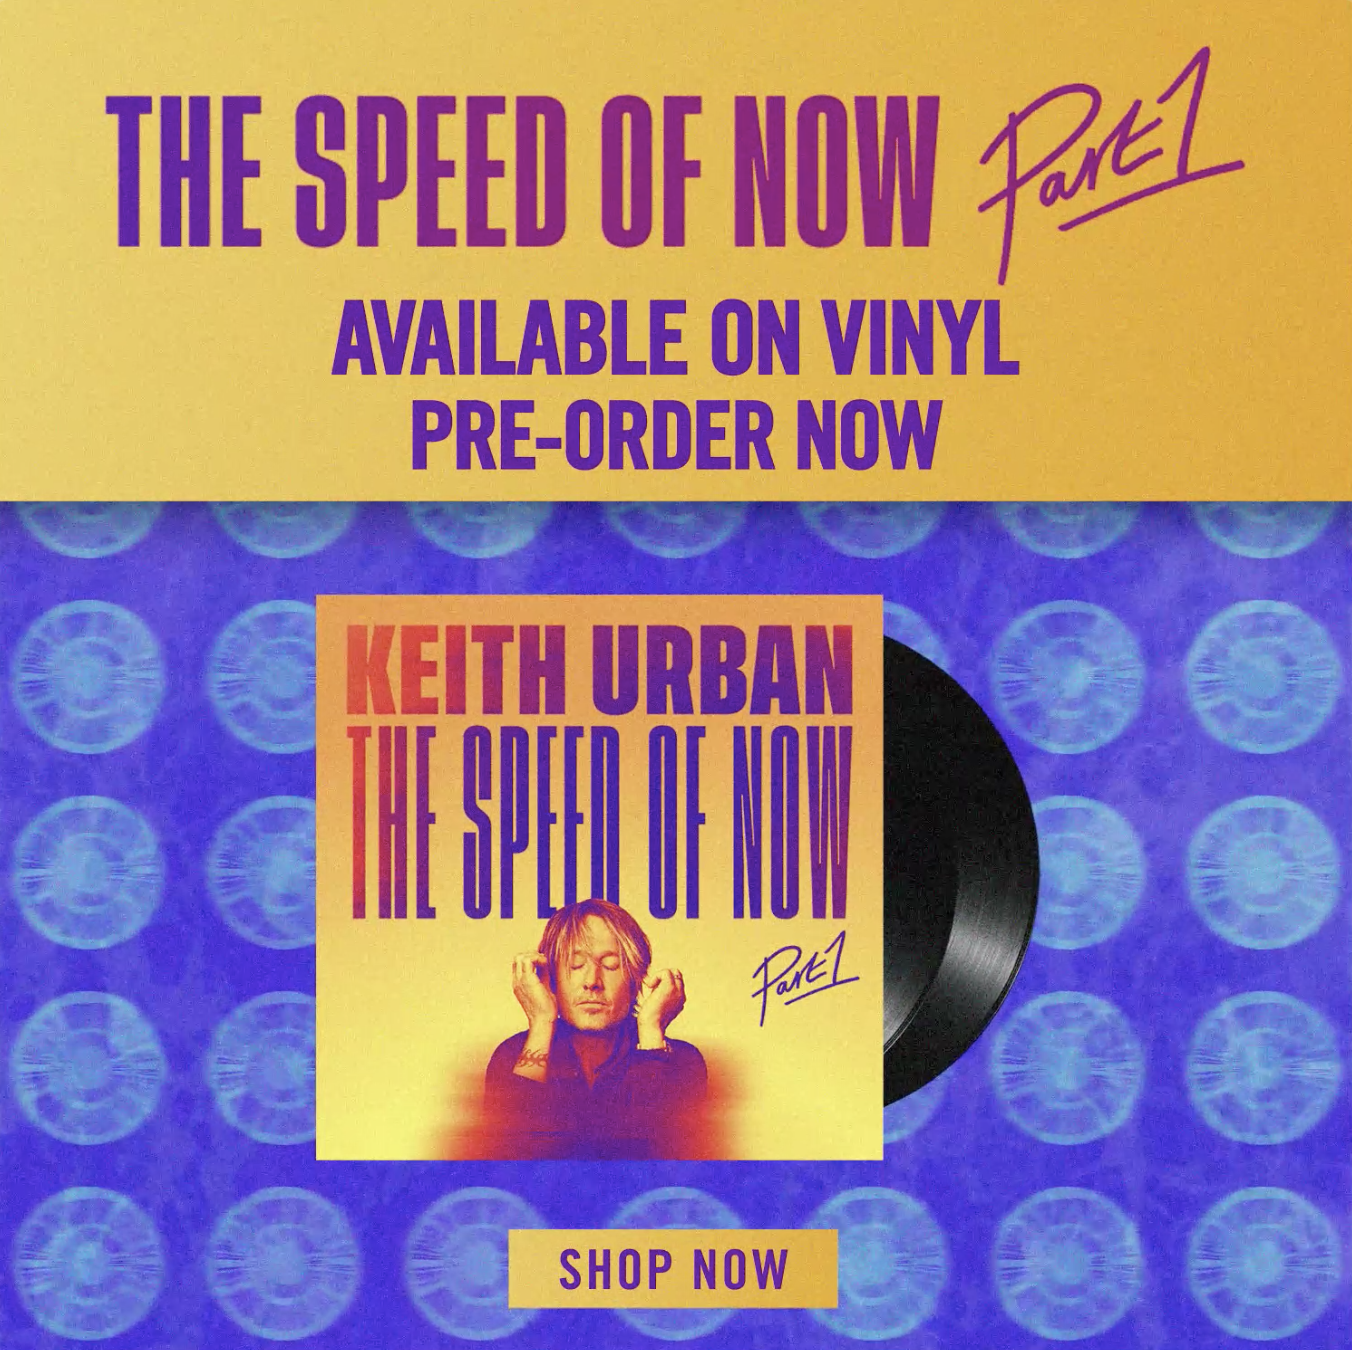 Keith Urban - THE SPEED OF NOW Store